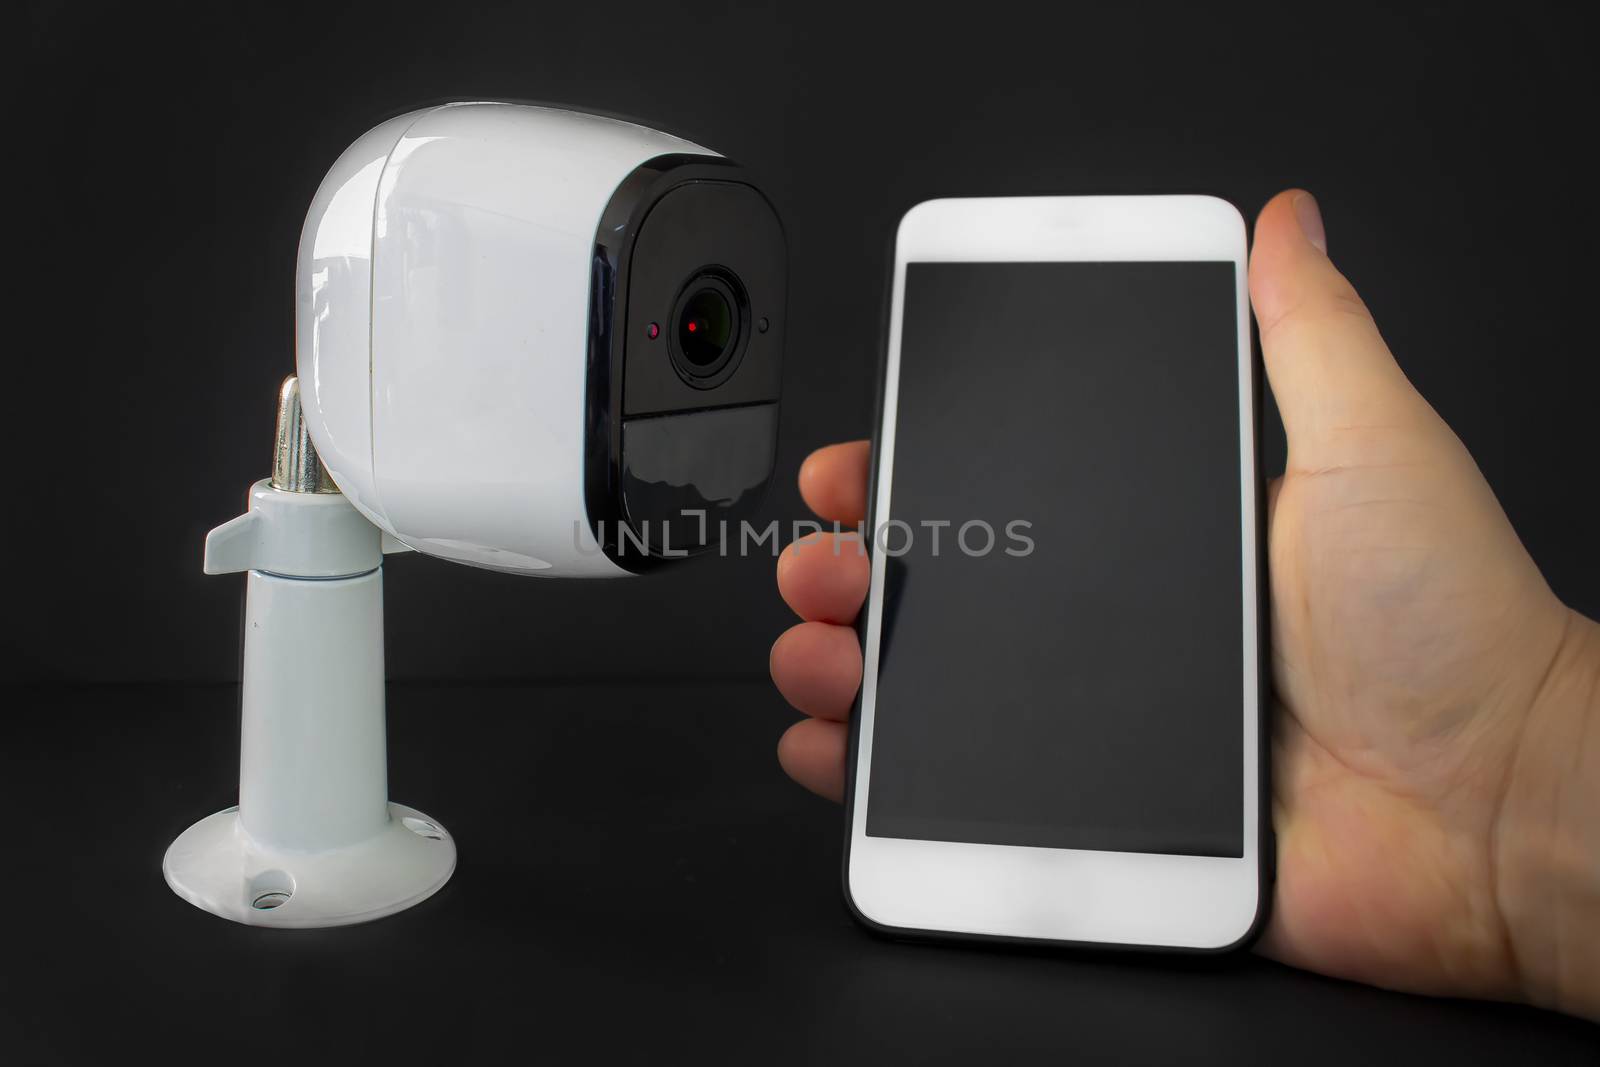 A smart security camera with a smart phone hold by a person by oasisamuel